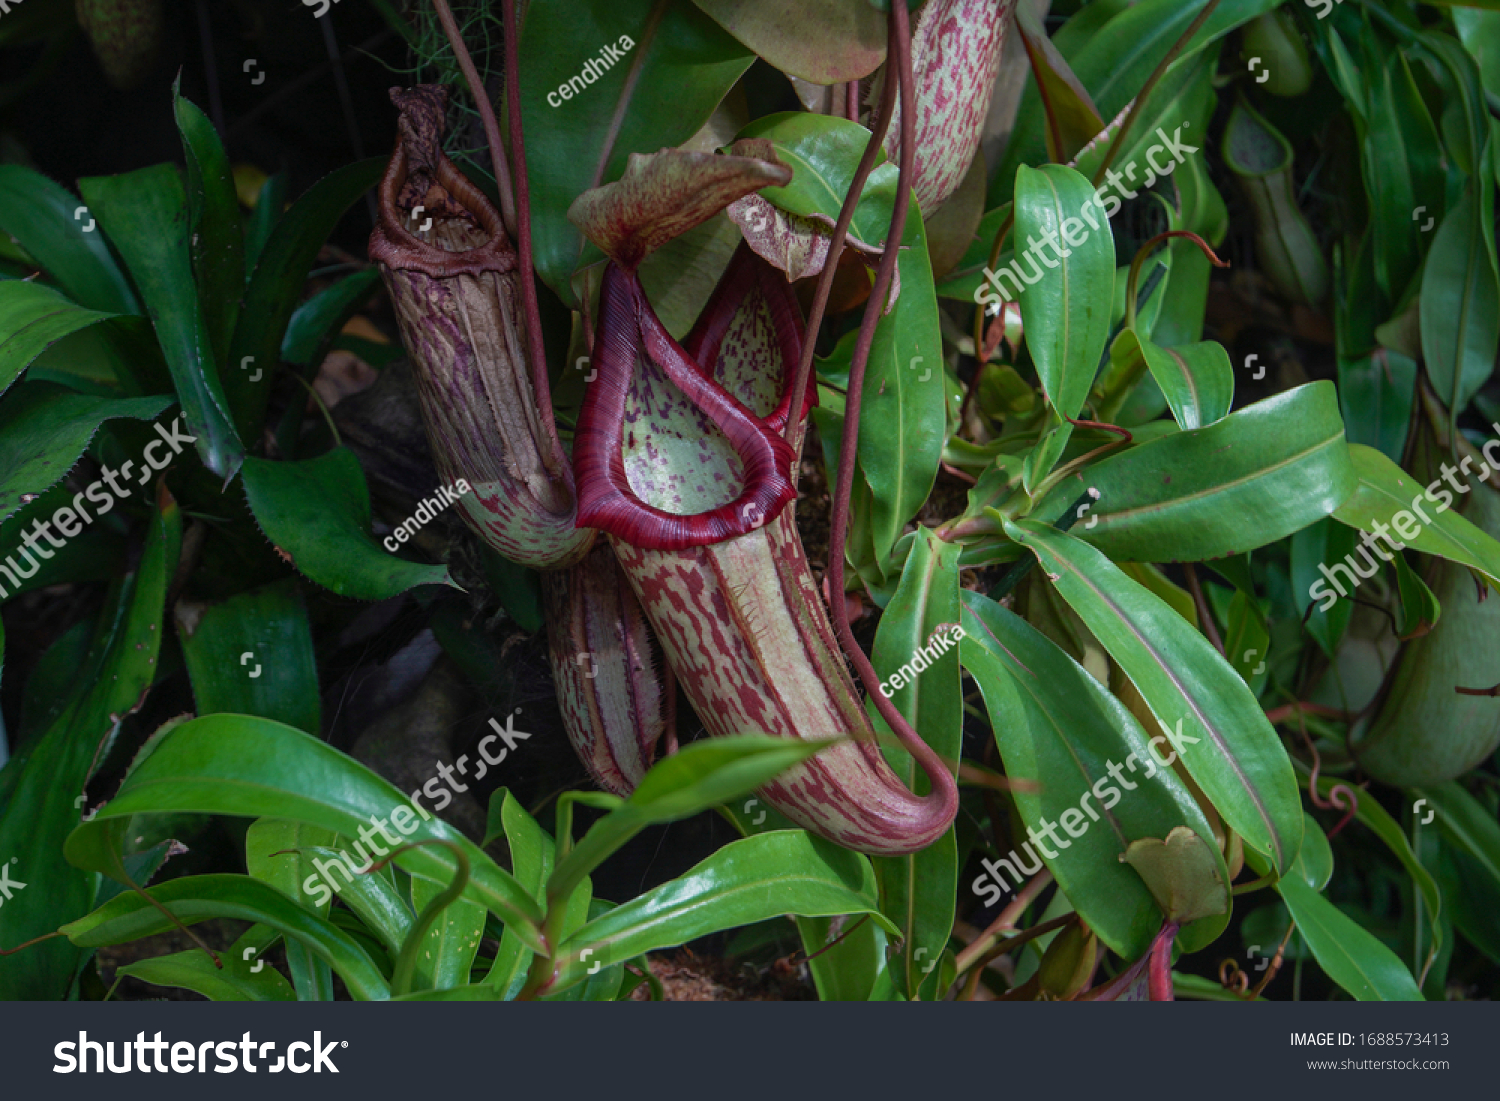 Exotic flower of Carnivorous plants, Nepenthes plants, Tropical pitcher plants and monkey cups #1688573413